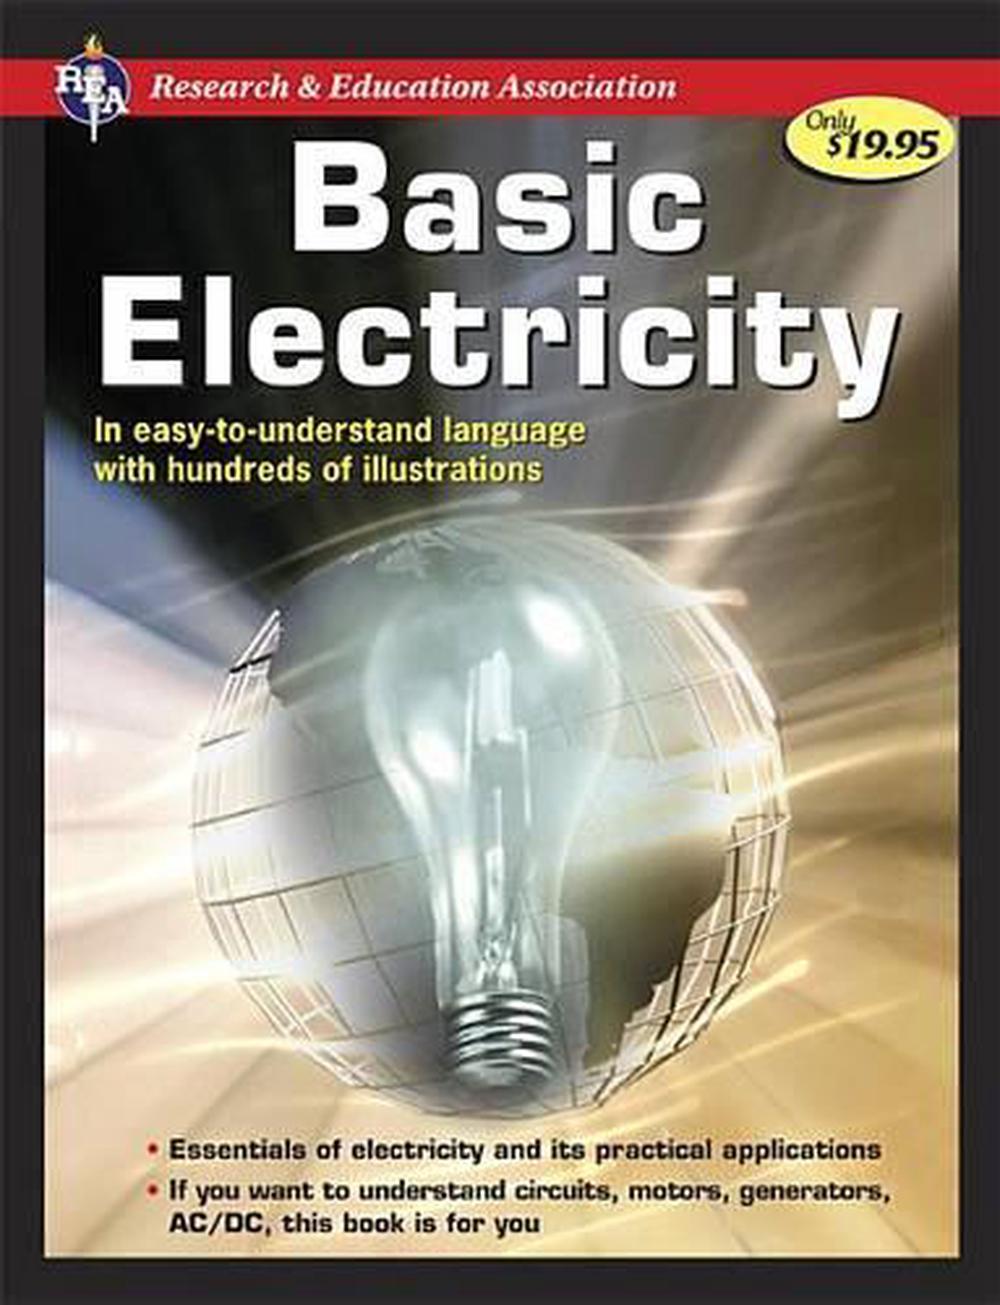 example of research title about electricity